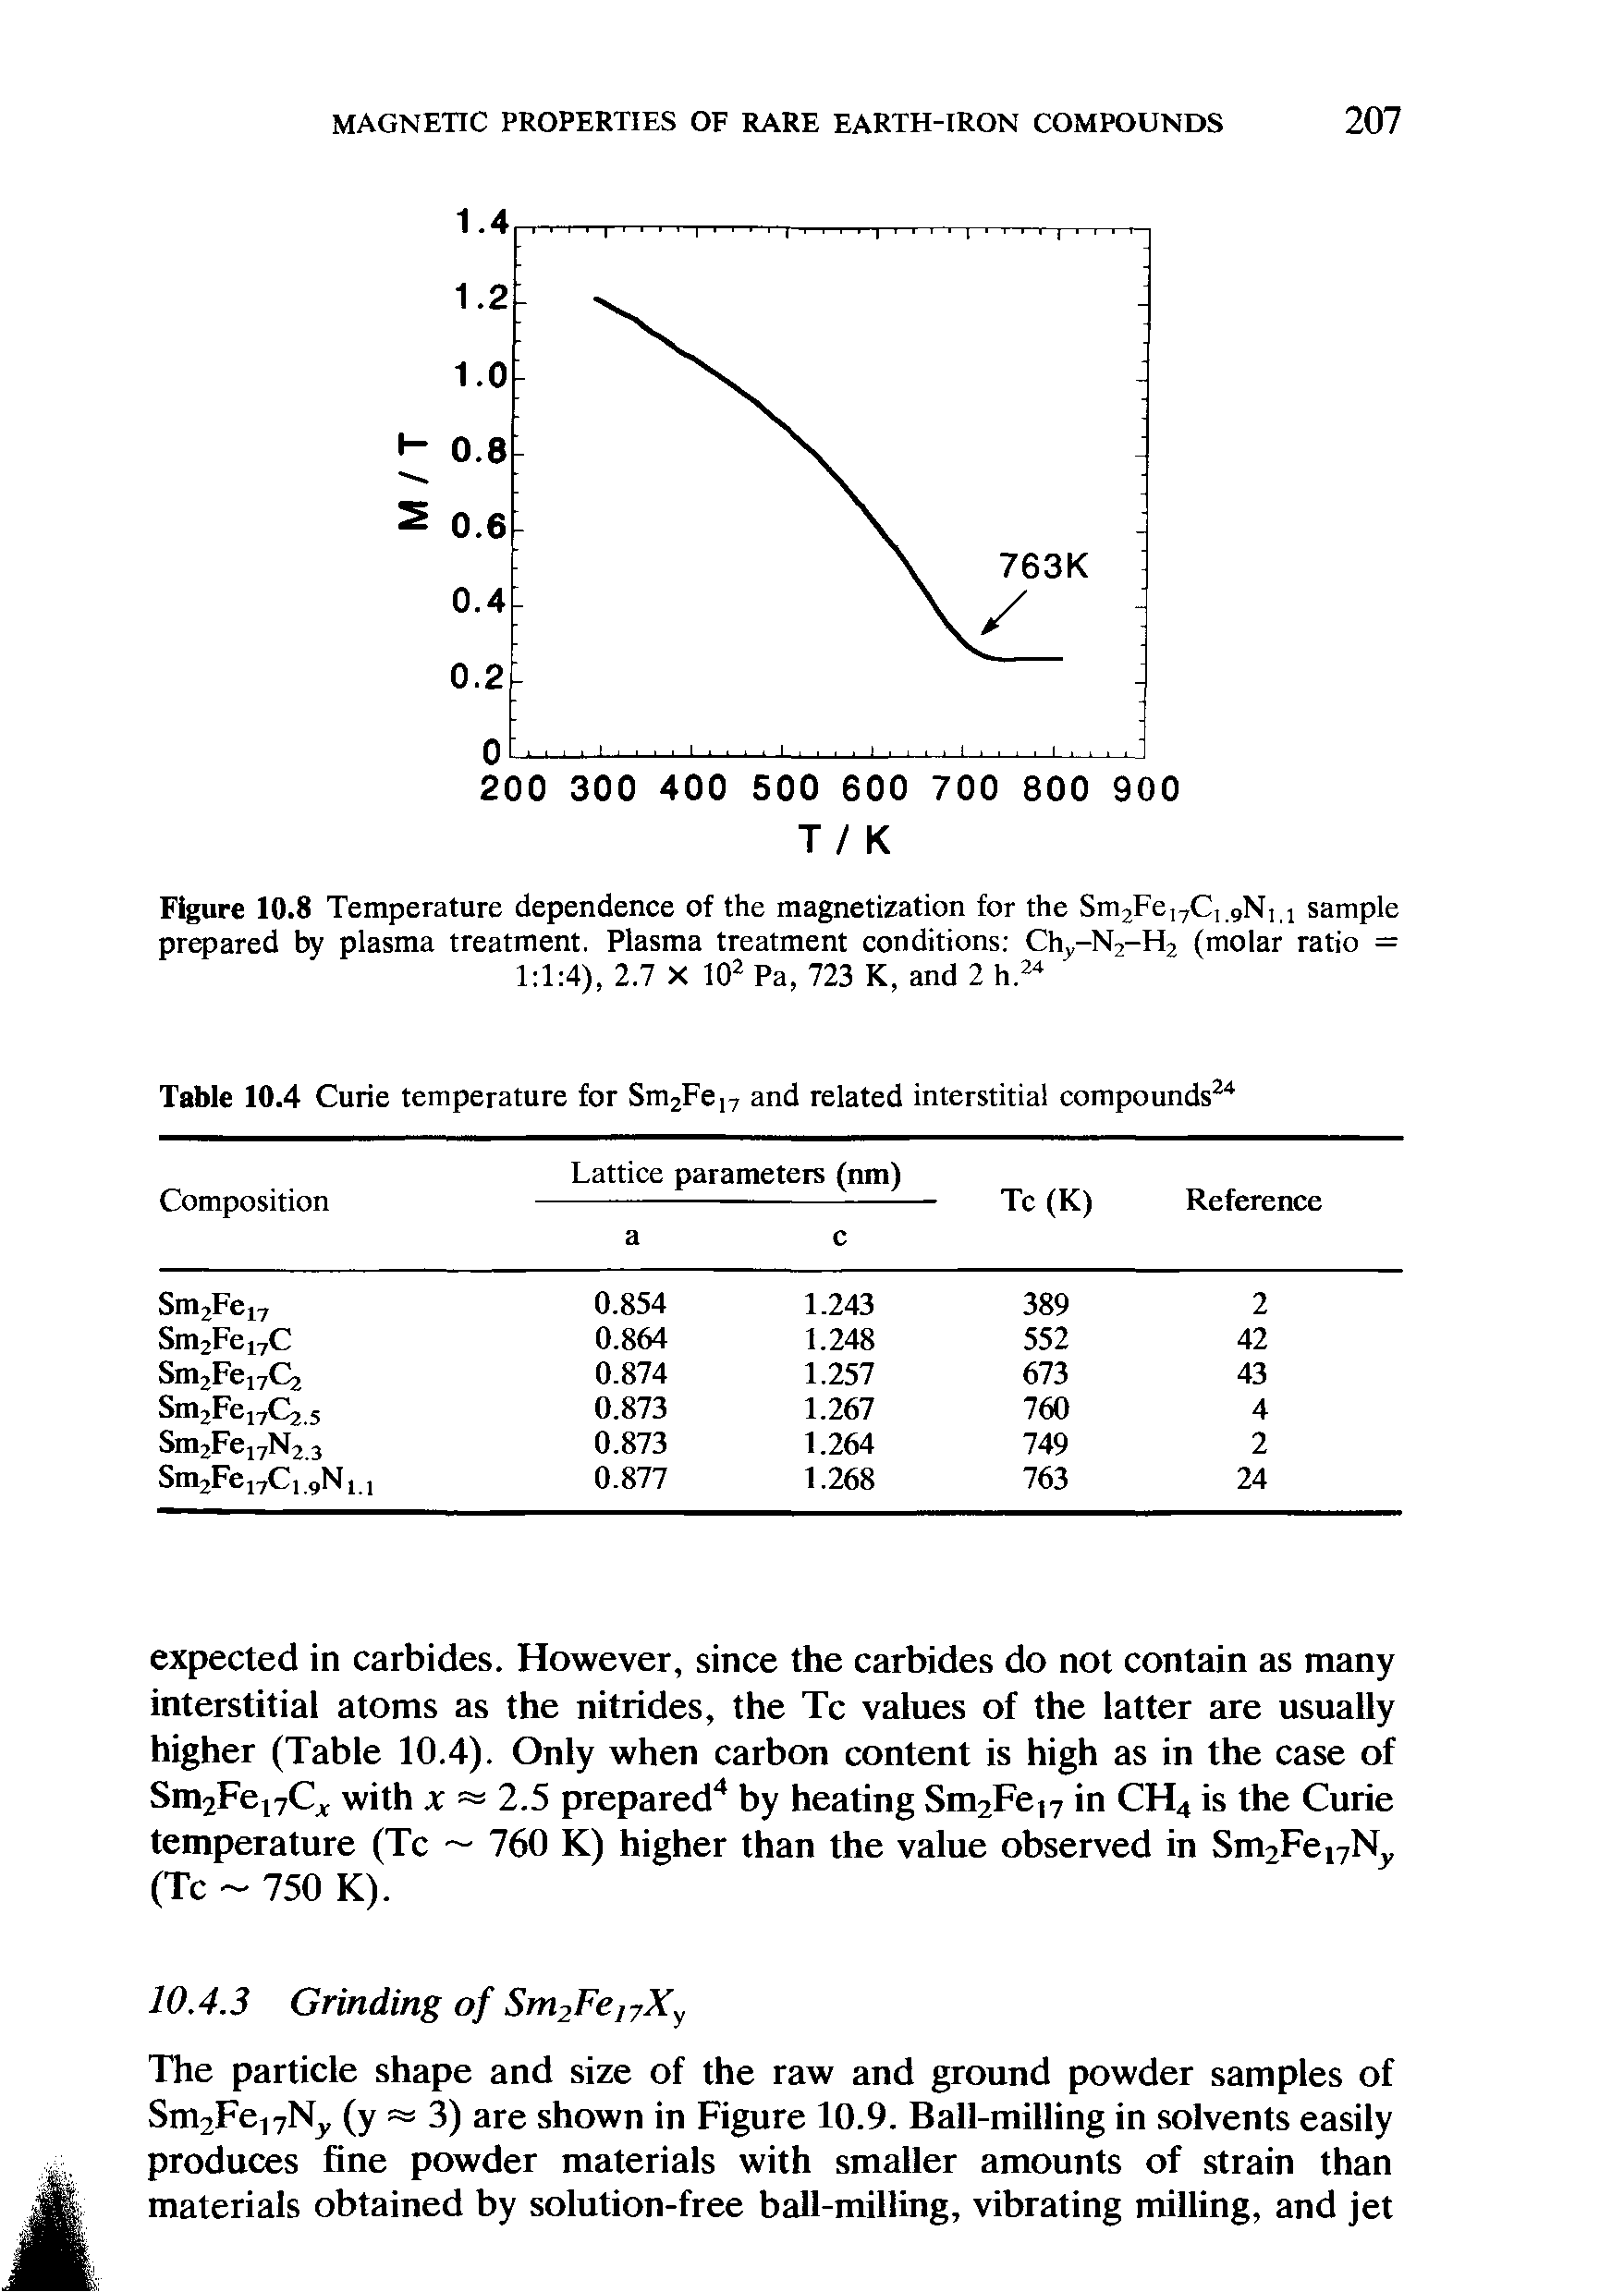 Figure 10.8 Temperature dependence of the magnetization for the Sn Fe Q.gN], sample prepared by plasma treatment. Plasma treatment conditions Chy-N.-H (molar ratio = 1 1 4), 2.7 X 102 Pa, 723 K, and 2 h.24...